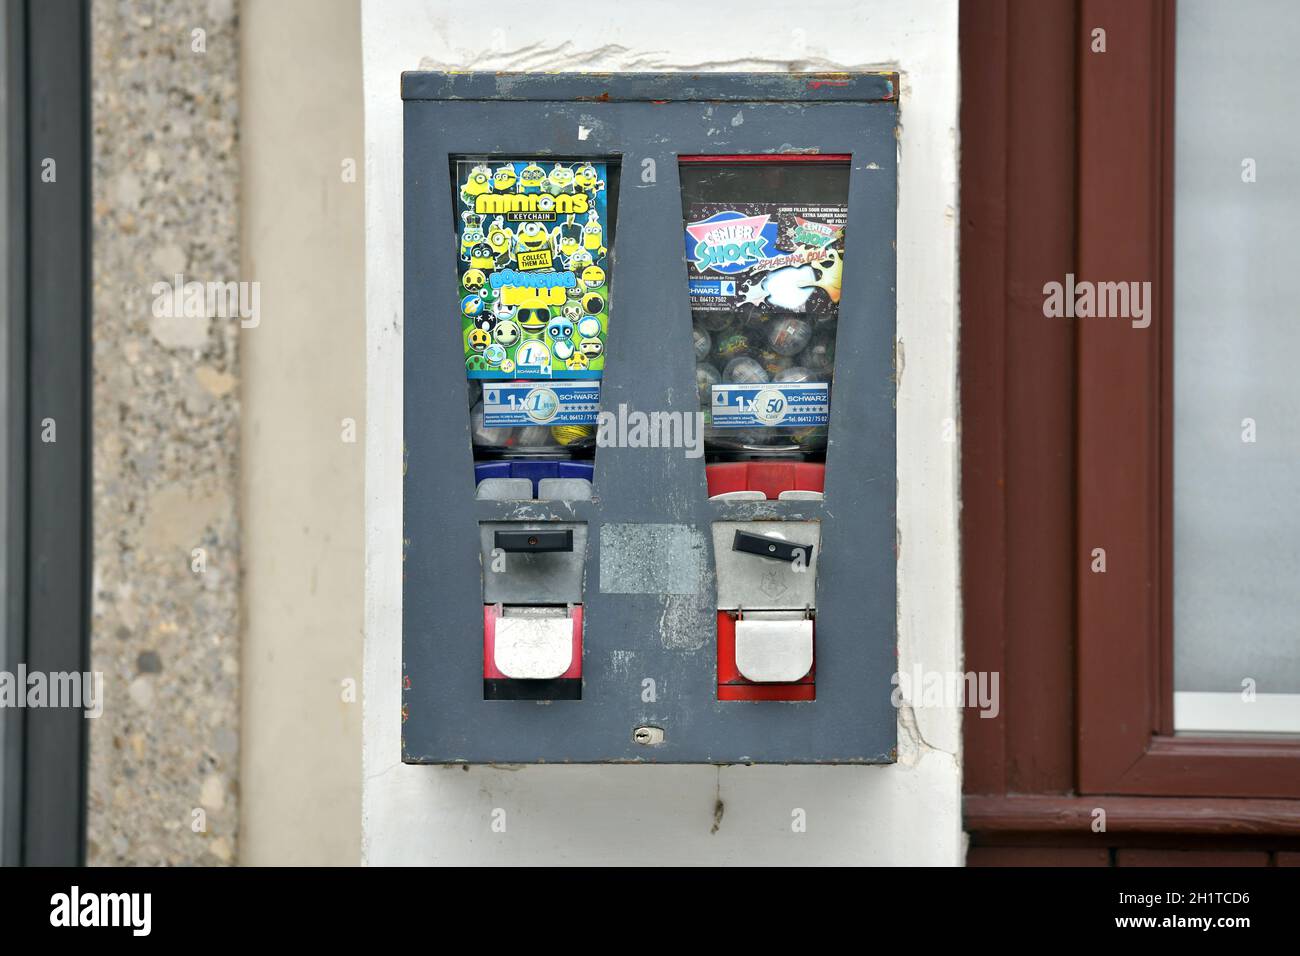 Toy Automat High Resolution Stock Photography and Images - Alamy